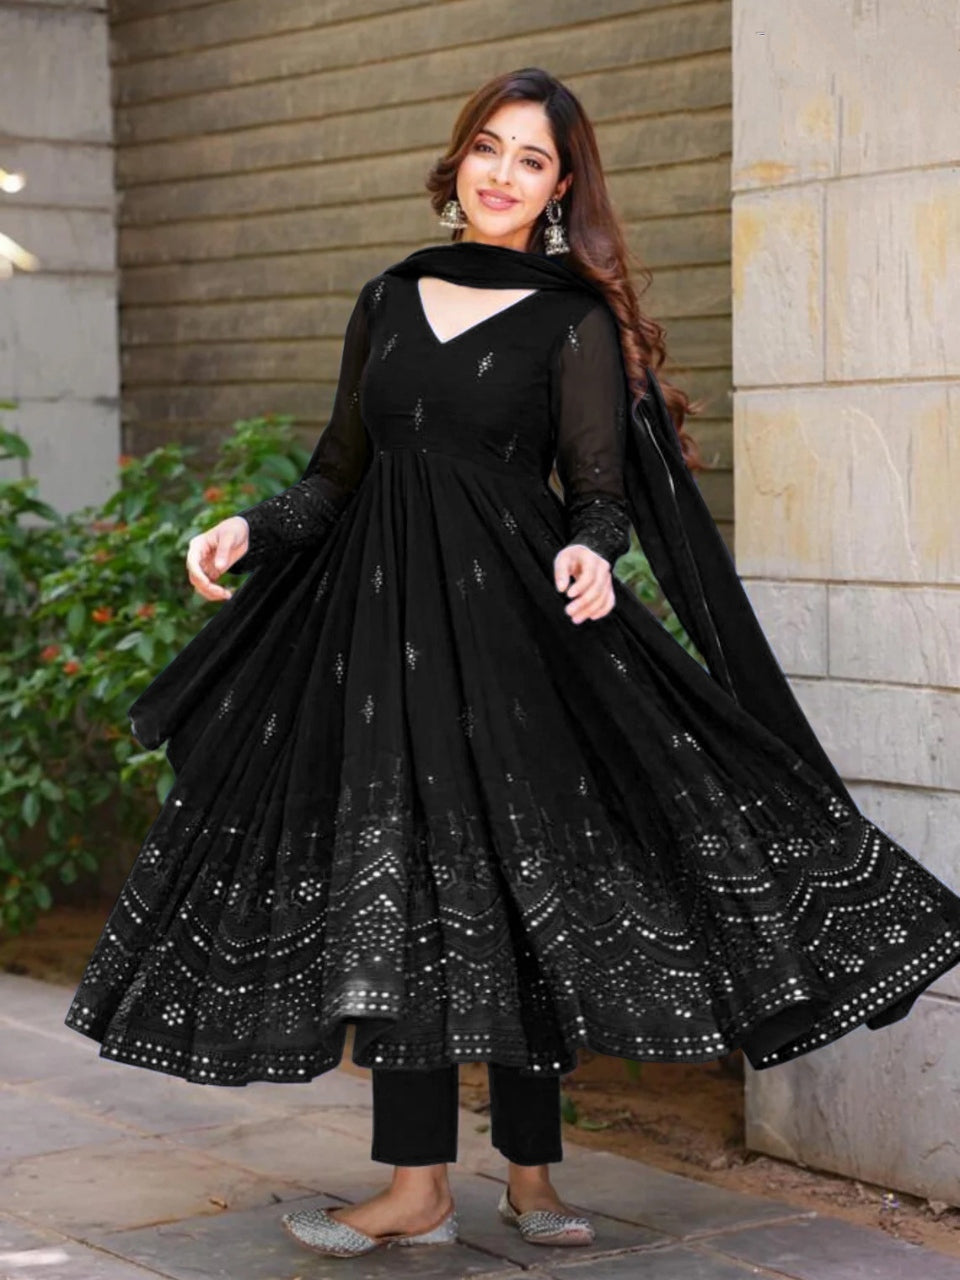 New Black Georgette Anarkali Suit Set With Pant and Dupatta Black Printed Dress  Black Outfit Black Dress Black Anarkali Suit Black Gown Set - Etsy